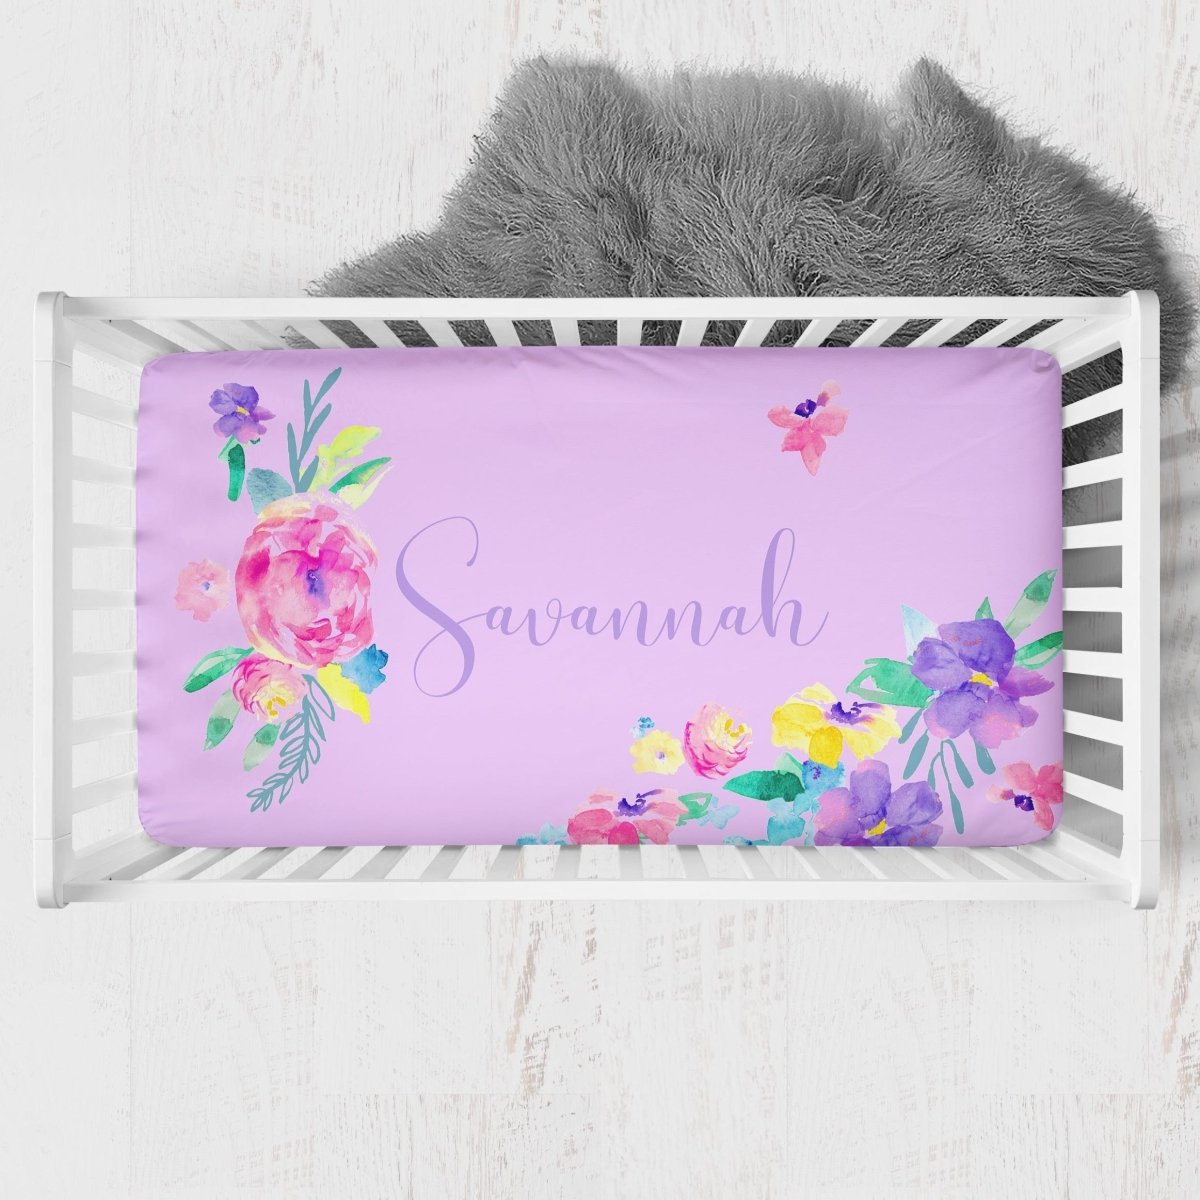 Safari Babe Personalized Crib Sheet - gender_girl, Personalized_Yes, text